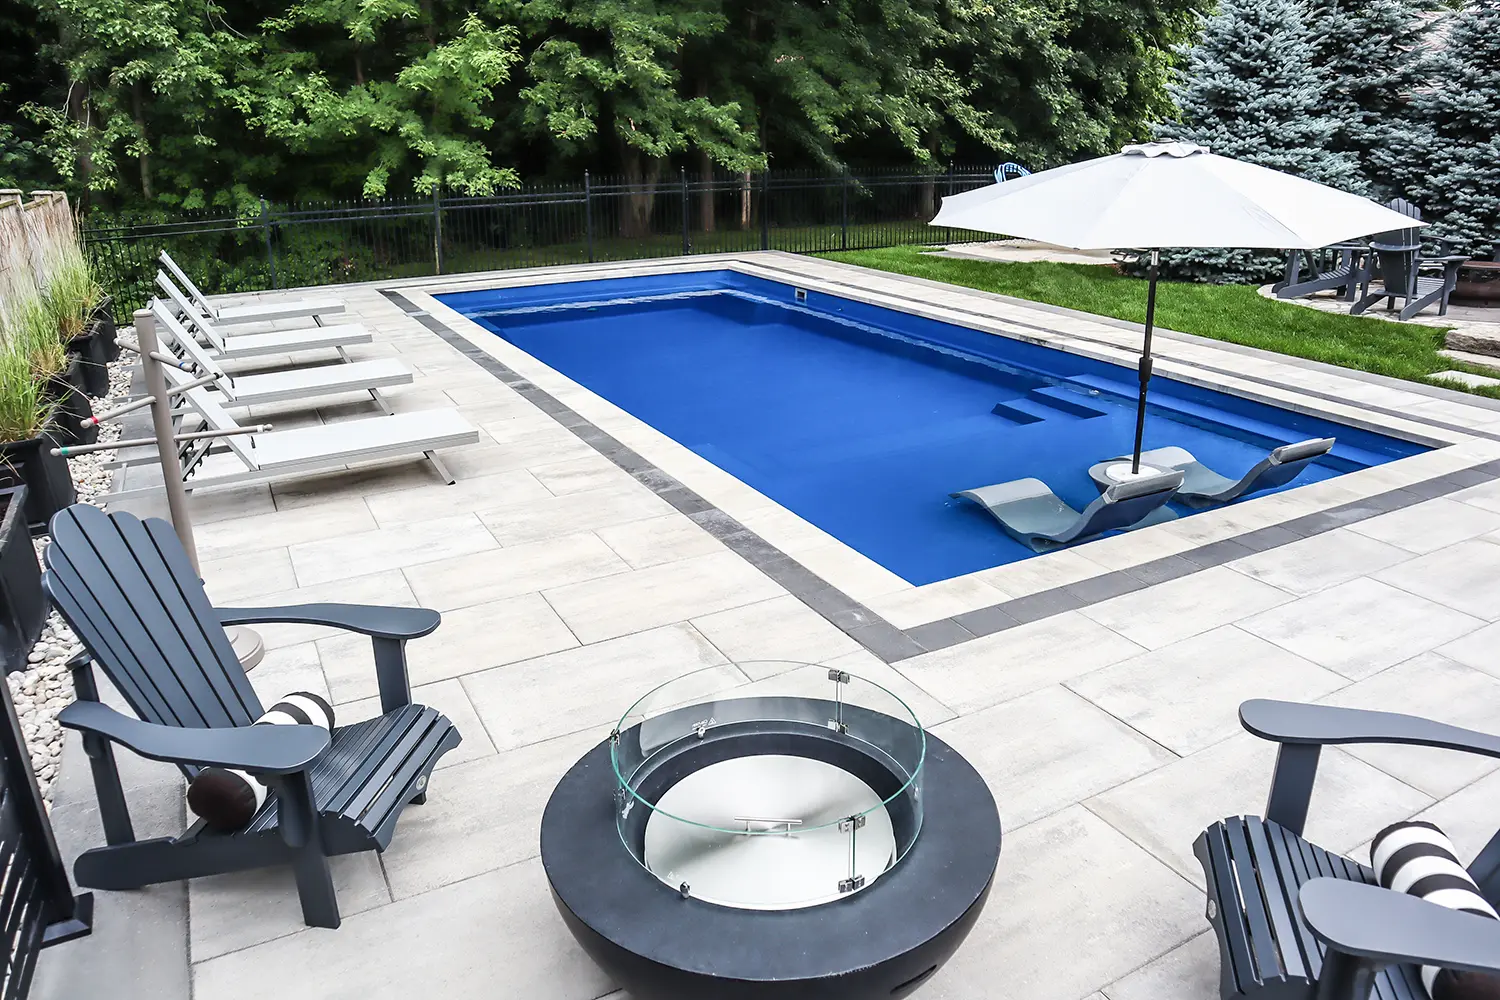 This Illusion 35 is an ideal fiberglass pool and pool of the month